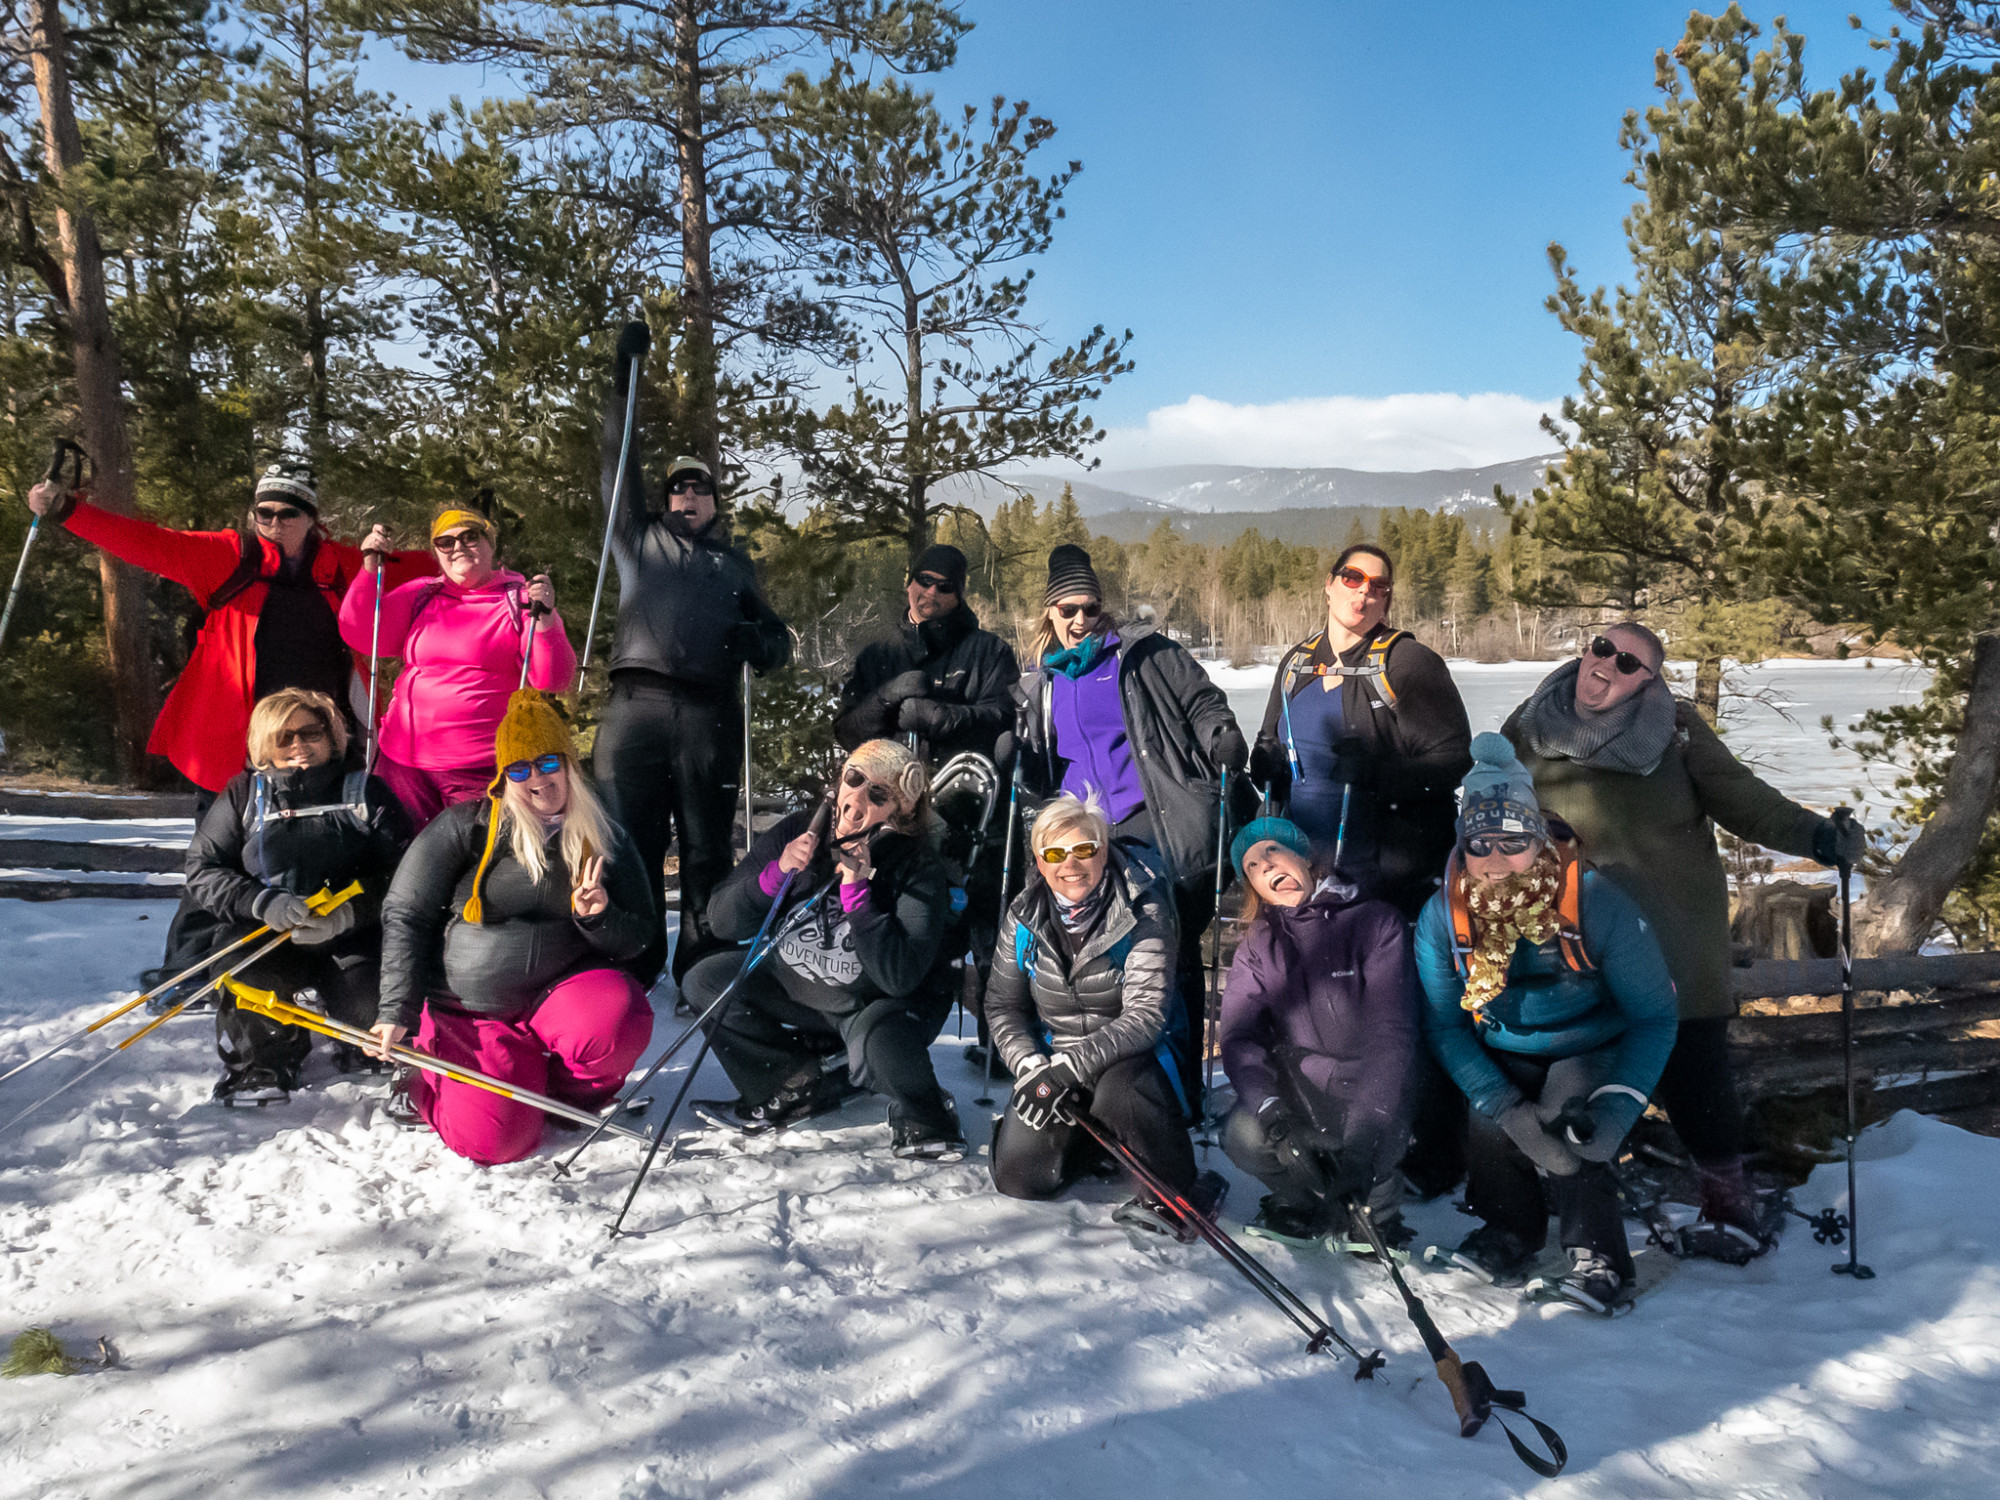 group photo of participants at WNDRoutdoors size inclusive snowshoeing event